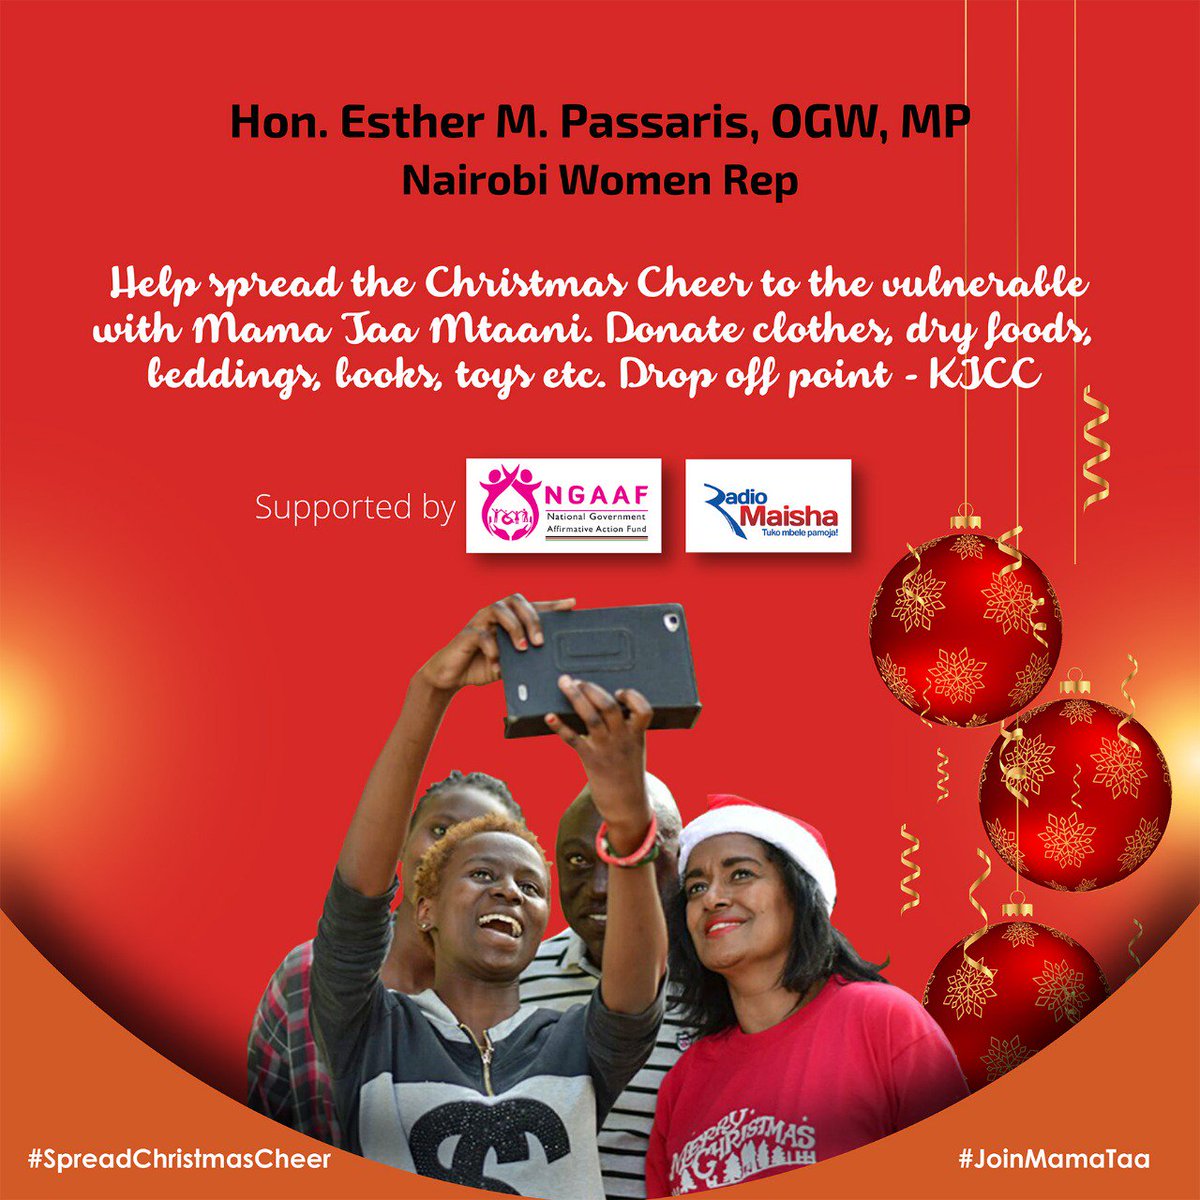 As much as christmas is a time for friends, family and celebration, there are people who probably aren’t having such a great time. @Estherpassaris
#SpreadChristmasCheer